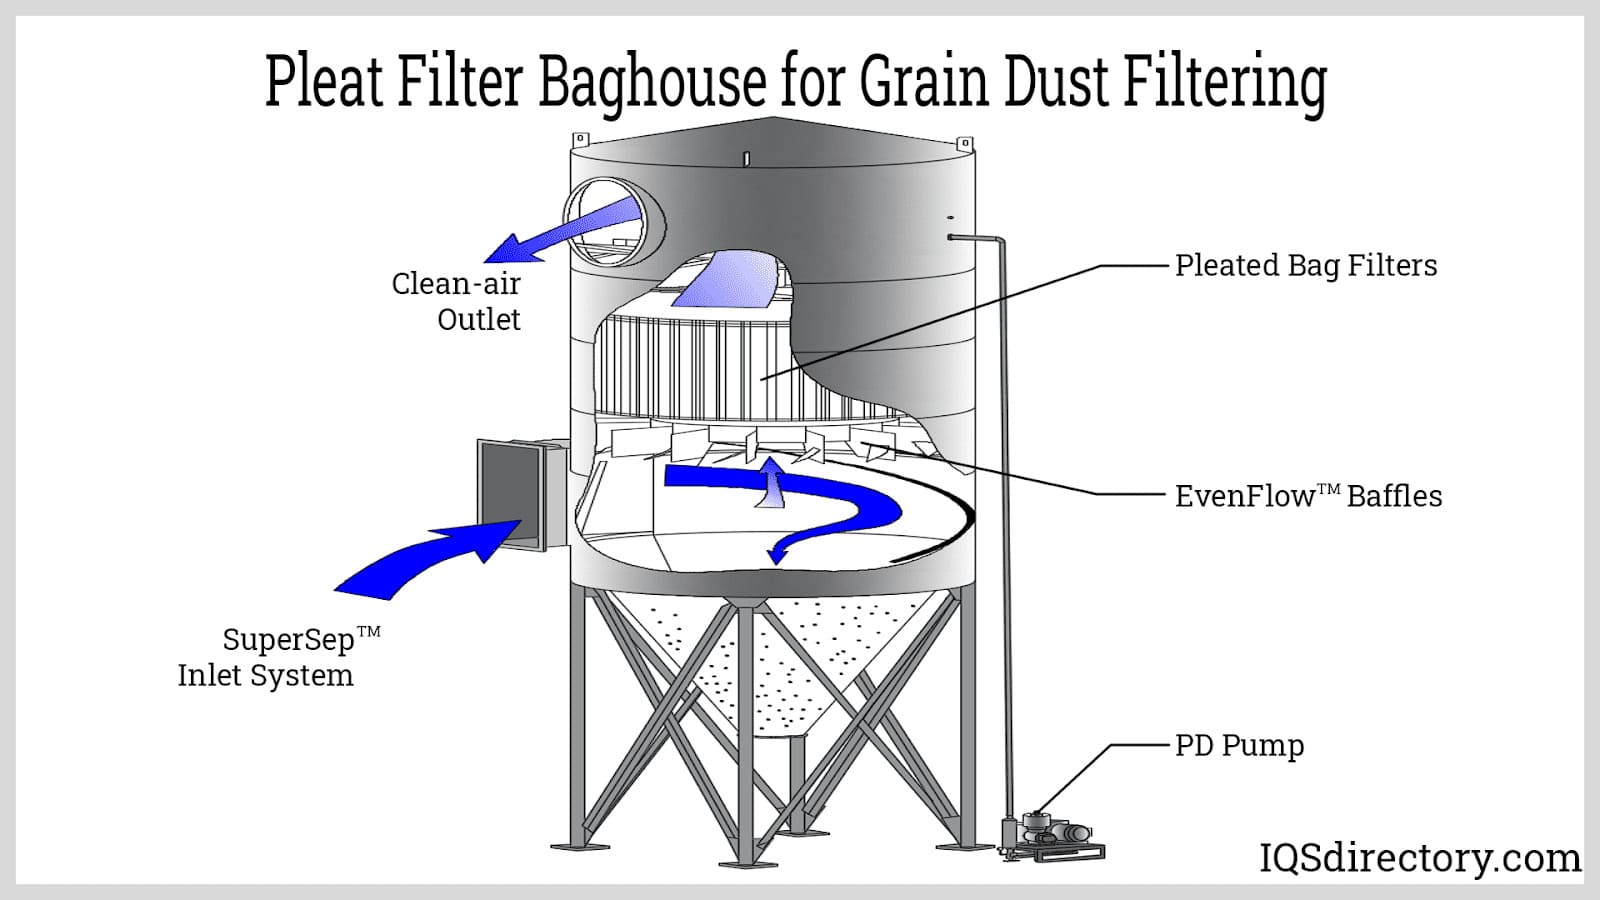 Pleat Filter Baghouse for Grain Dust Filtering